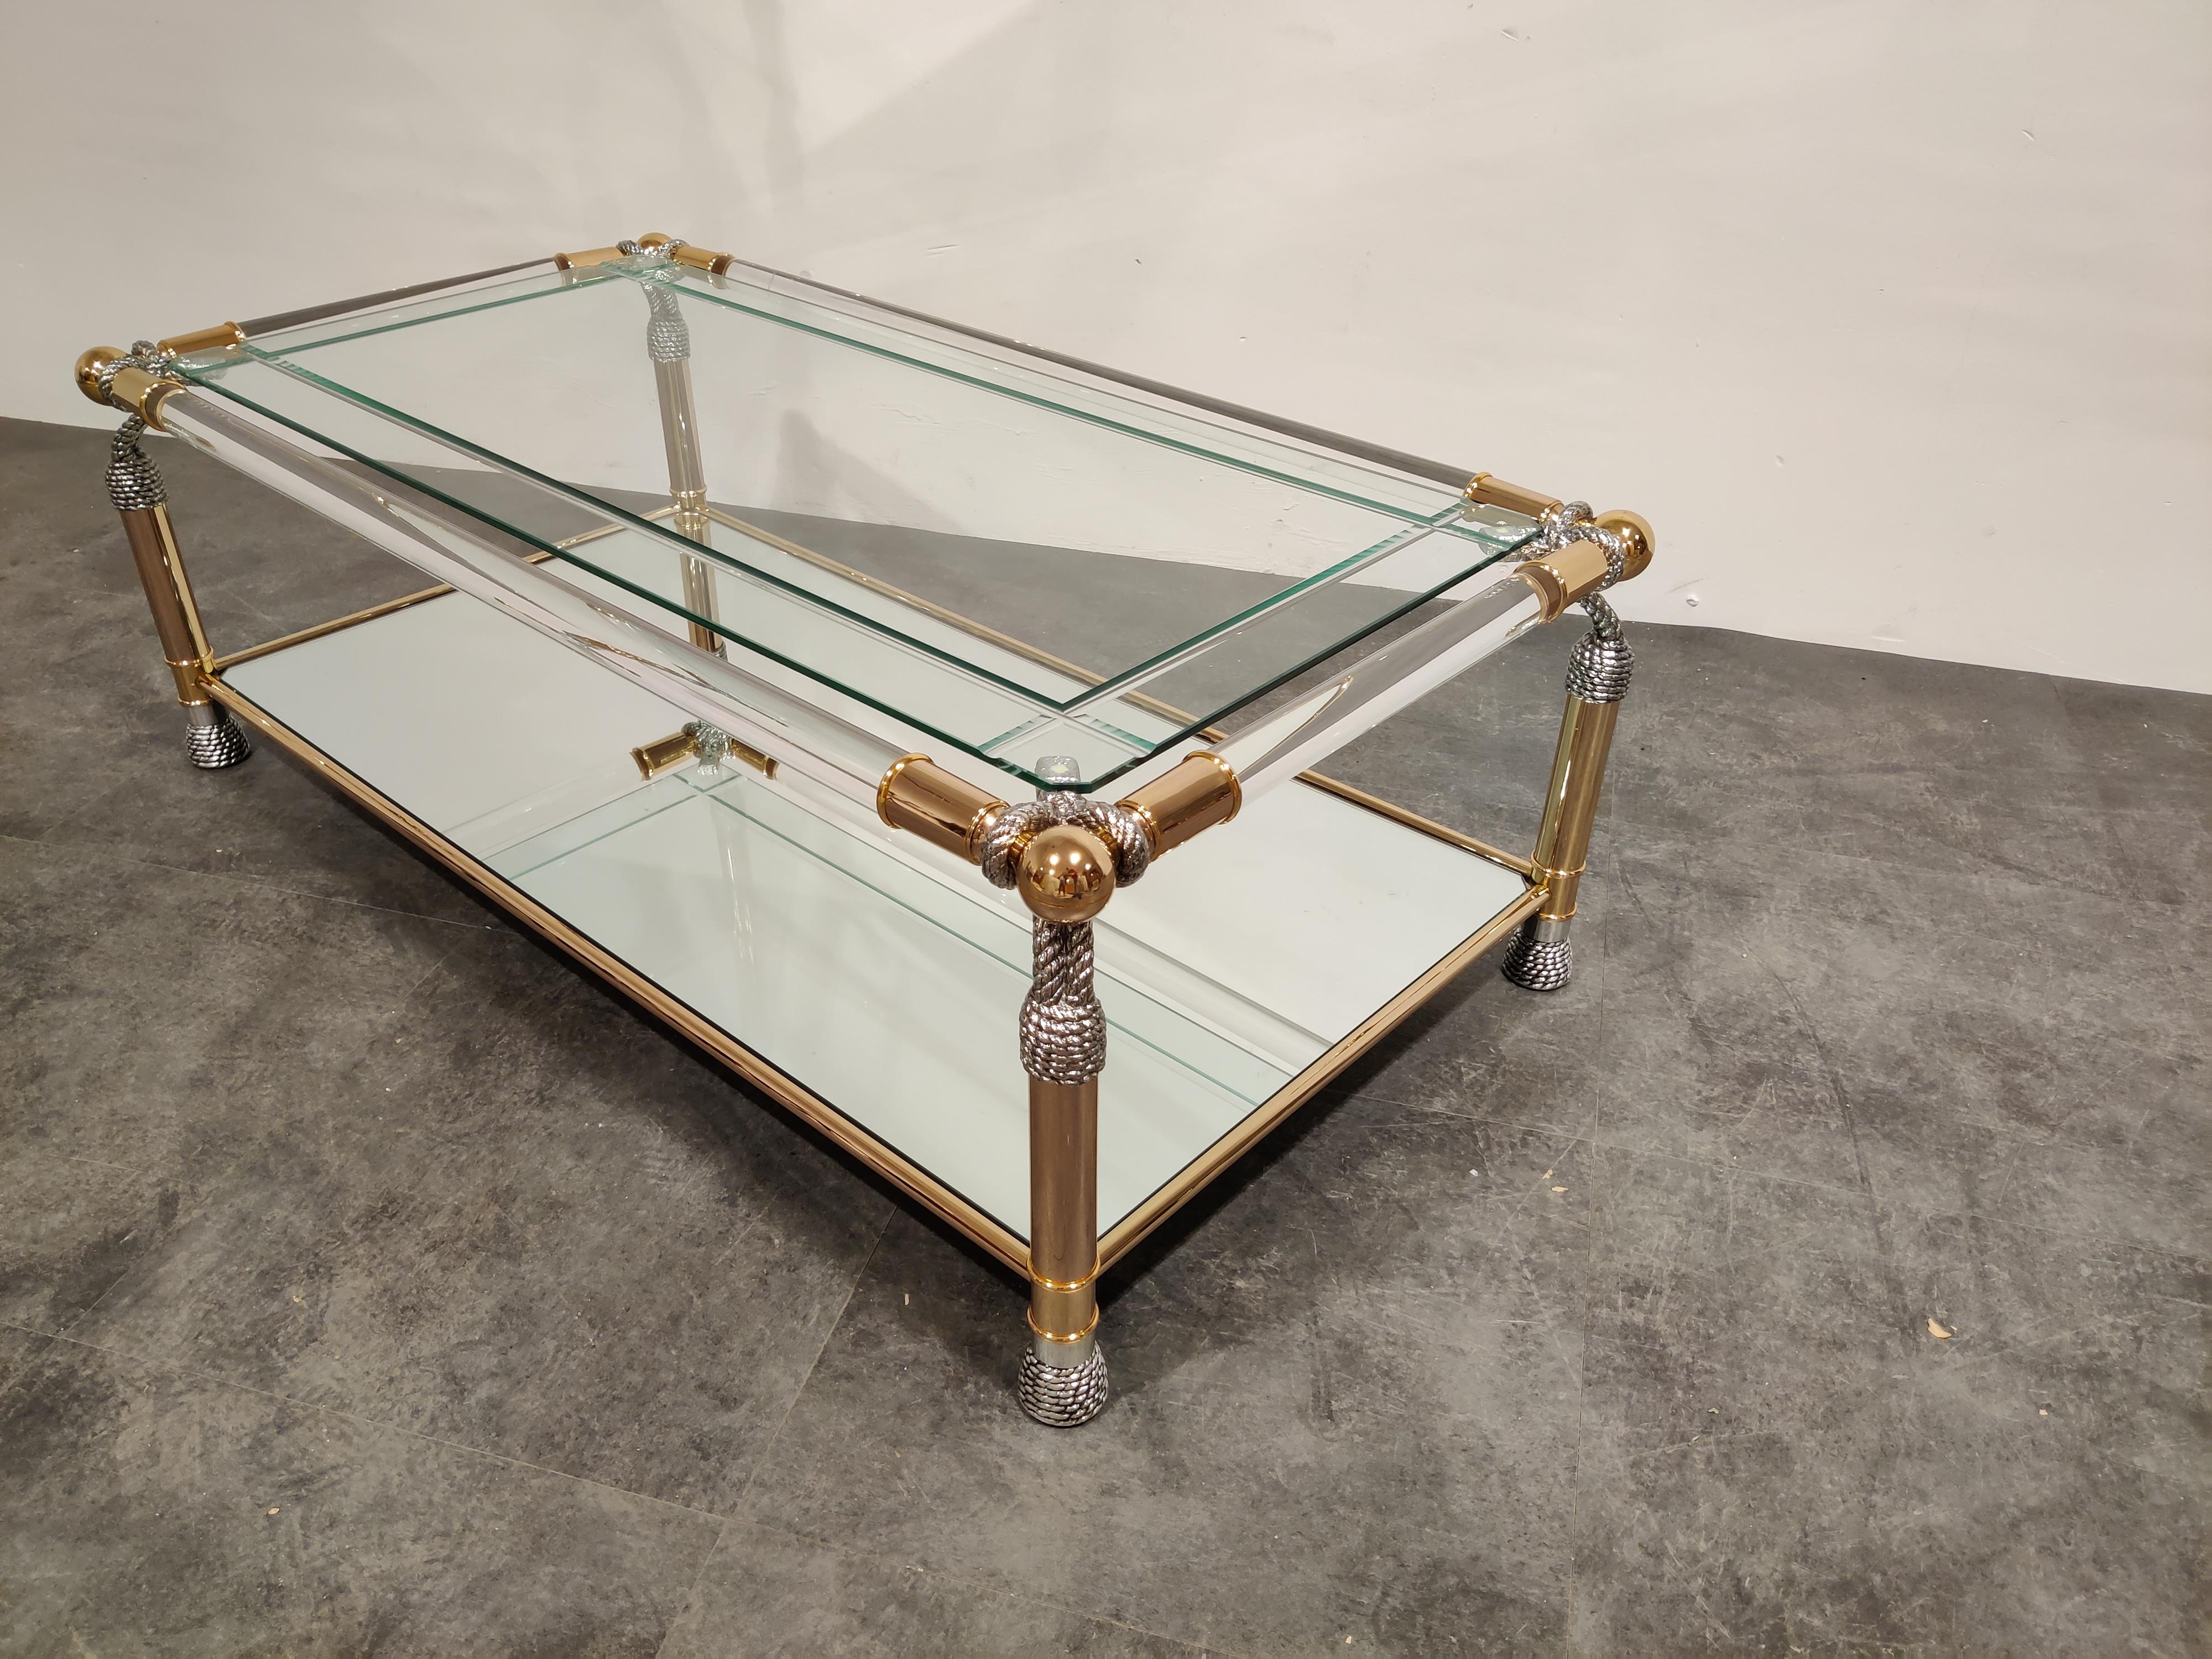 Unique coffee table with brass and Lucite frame and faux rope finish. Clear reeded and mirrored glass.

Beautiful Hollywood Regency style. 

Very good condition.

1980s- Belgium

Measures: Height 40cm/15.74